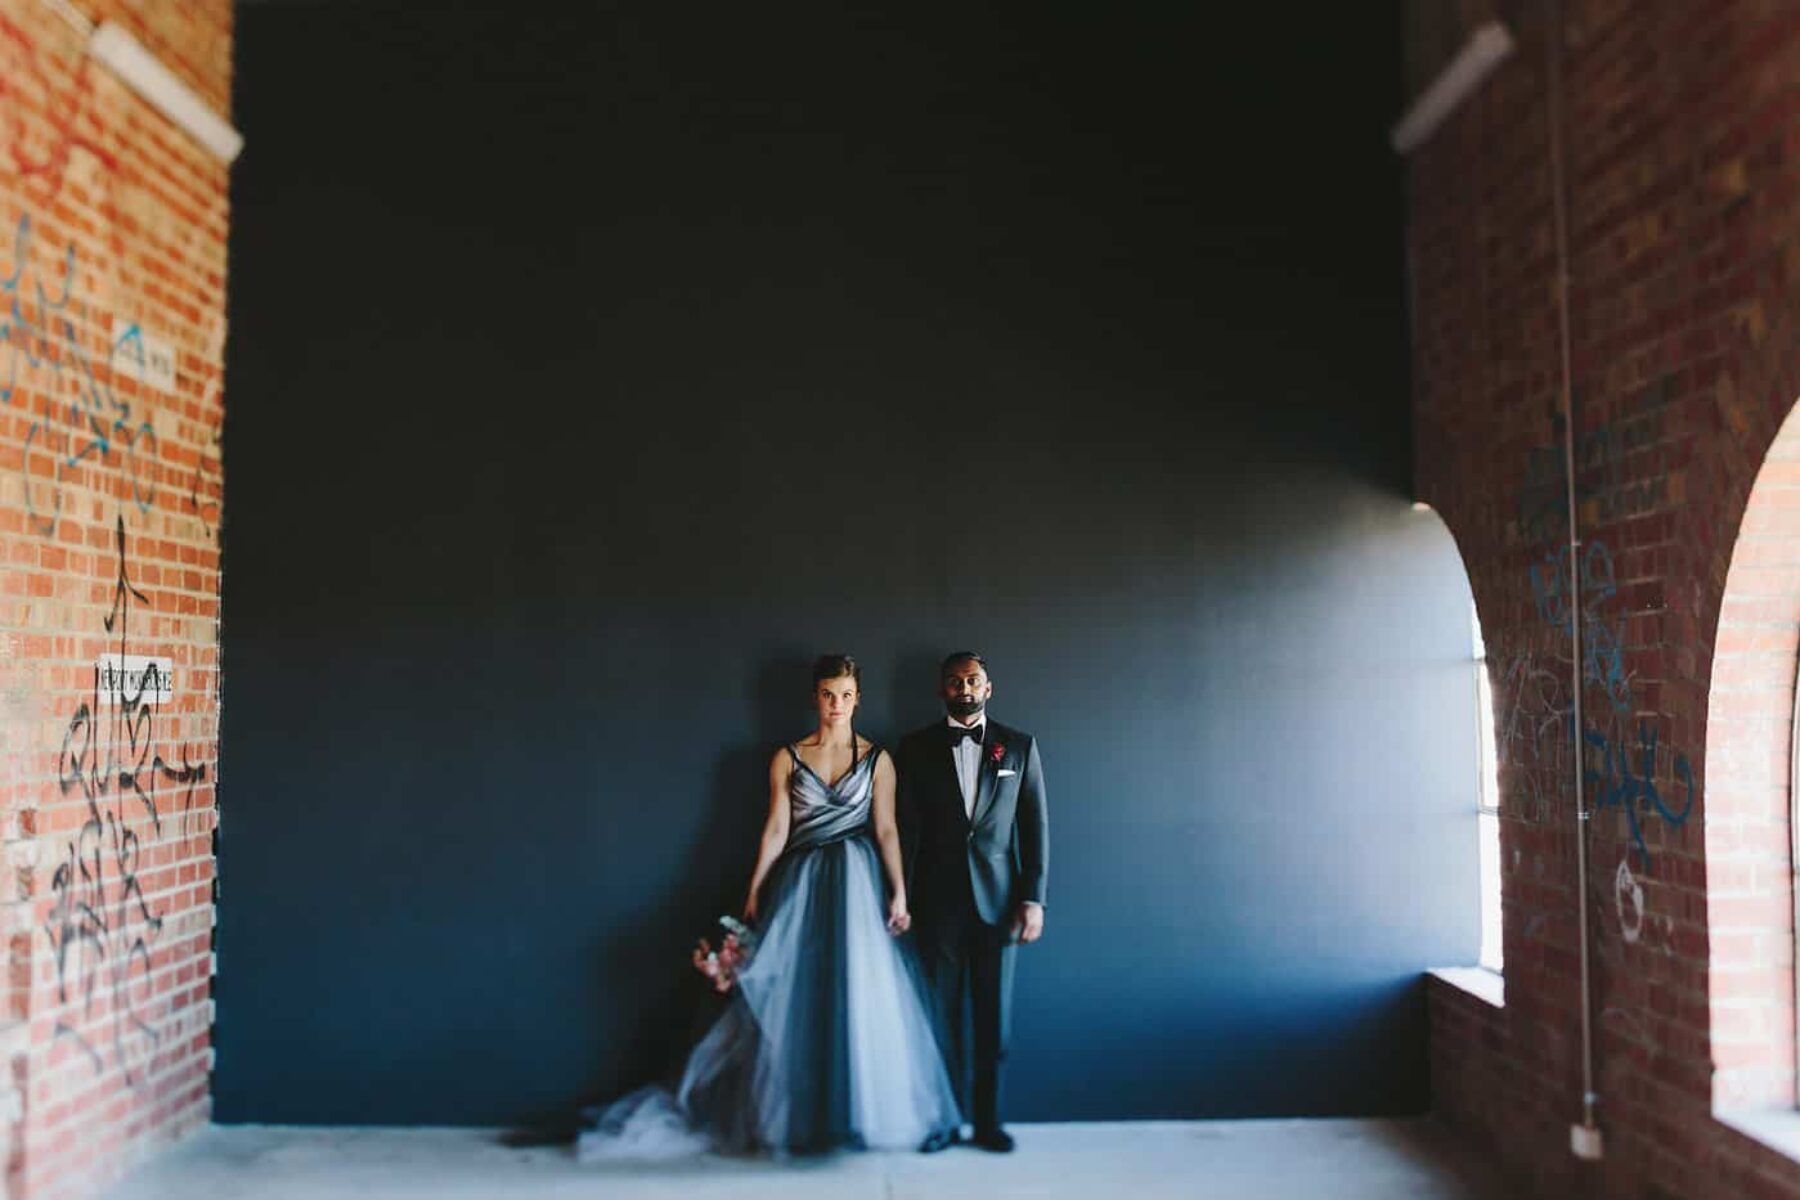 black tulle wedding dress by Sonia Cappellazzo